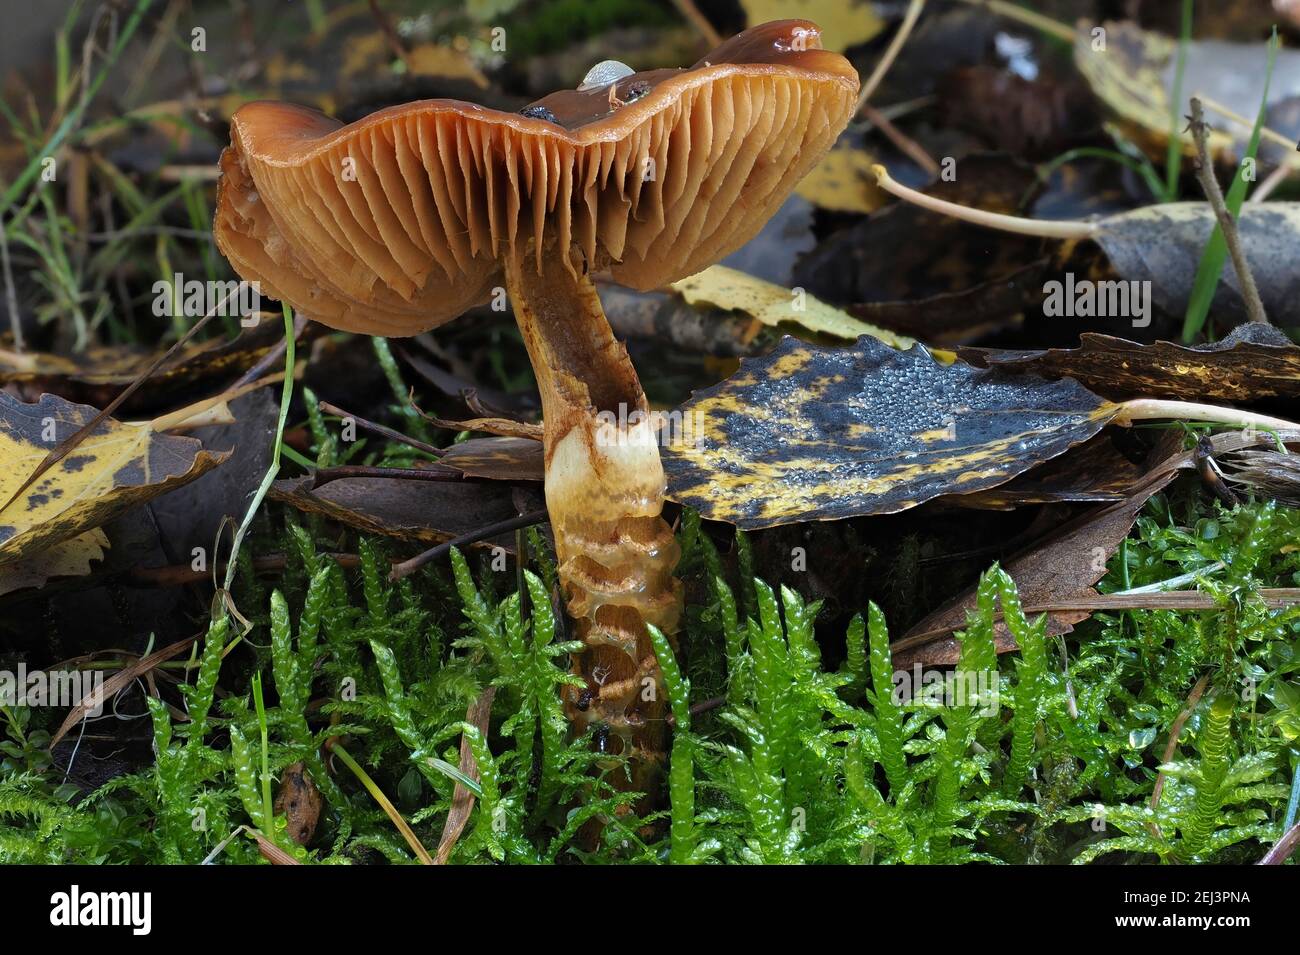 The Girdled Webcap (Cortinarius trivialis) is an poisonous mushroom , an intresting photo Stock Photo